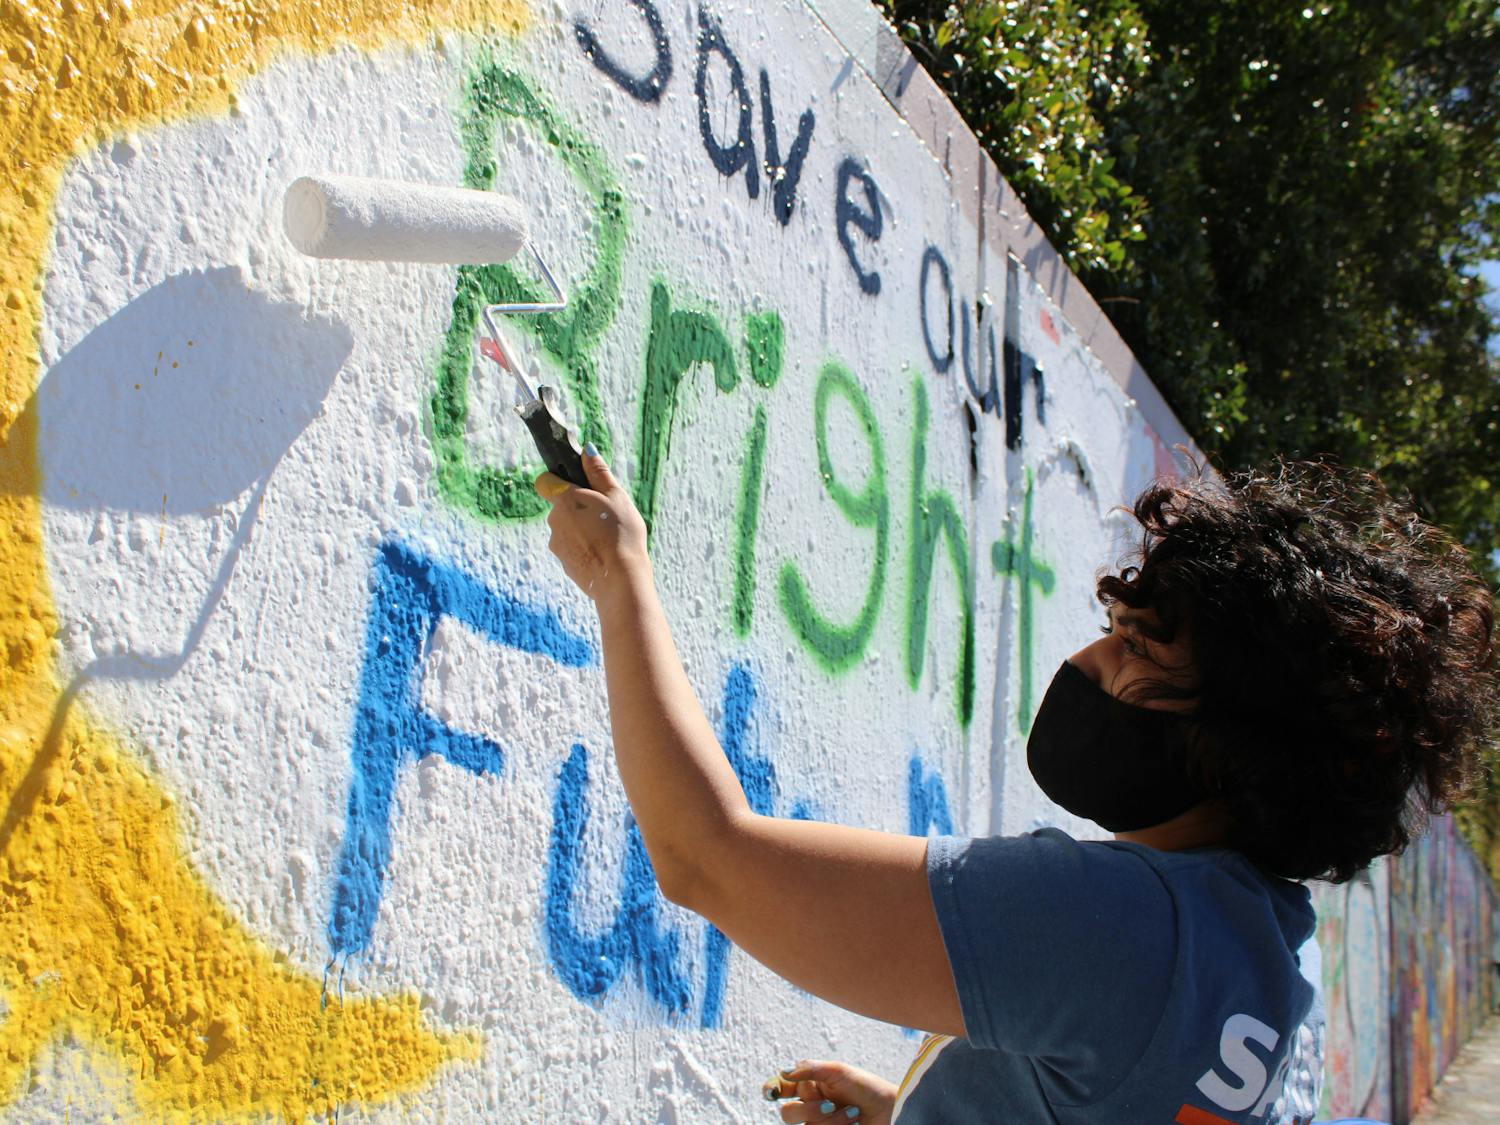 Alondra Arce, 20, a UF sustainability sophomore, paints a mural that says &quot;Save Our Bright Futures&quot; on Sunday, March 7, 2021. Arce recruited student volunteers to help her create the mural along 34th Street in Gainesville to raise awareness about Senate Bill 86, which would limit some students&#x27; access to state funding for college if passed.